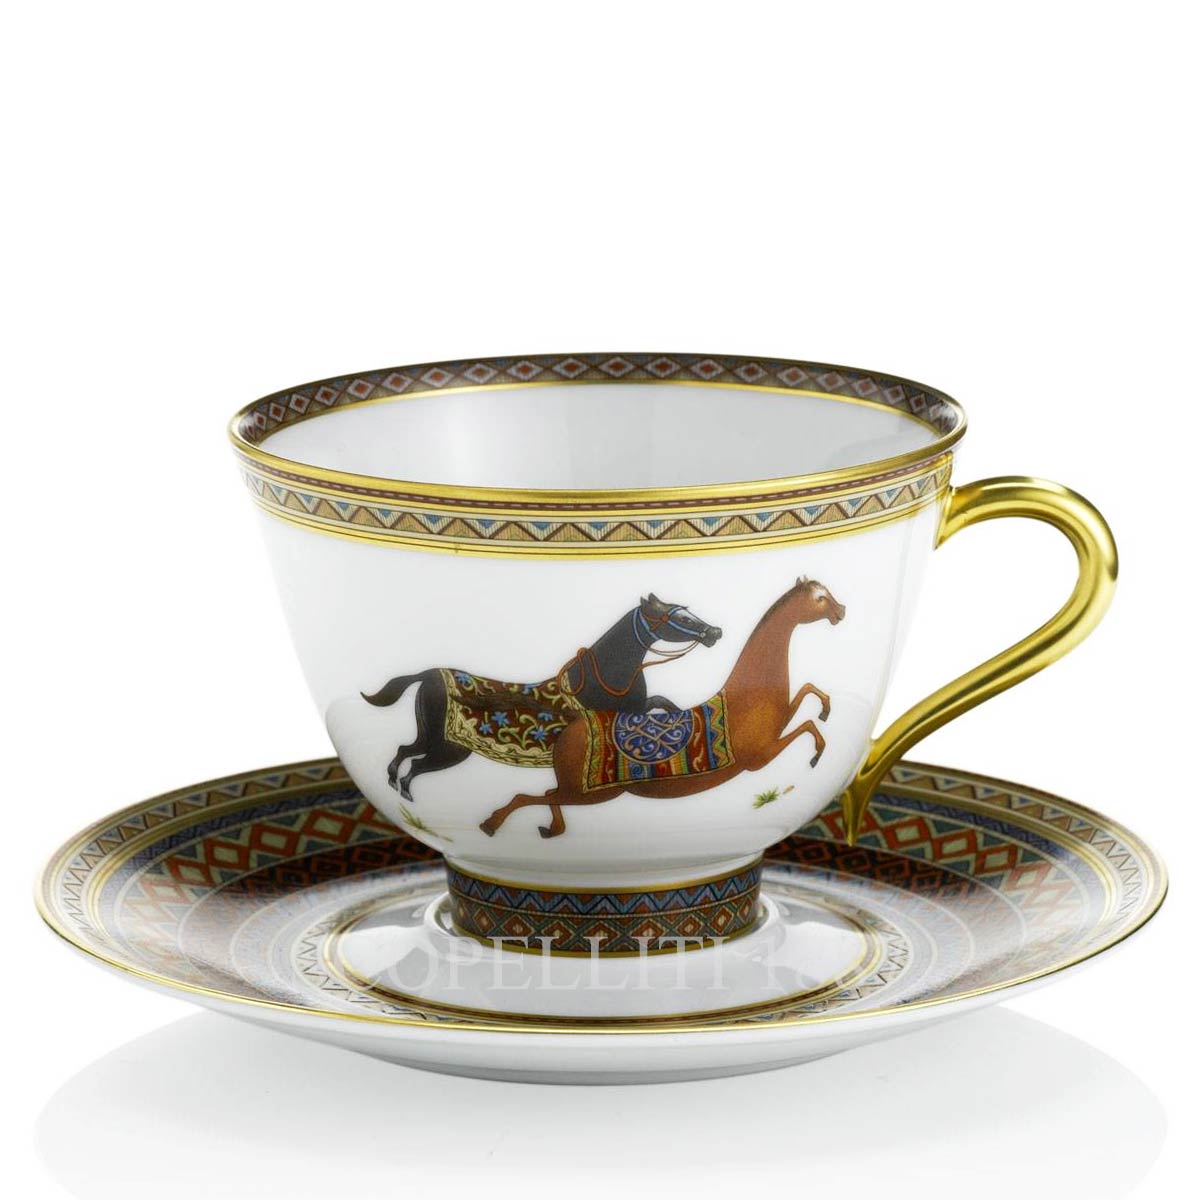 Hermes Cheval d'Orient Tea Cup and 